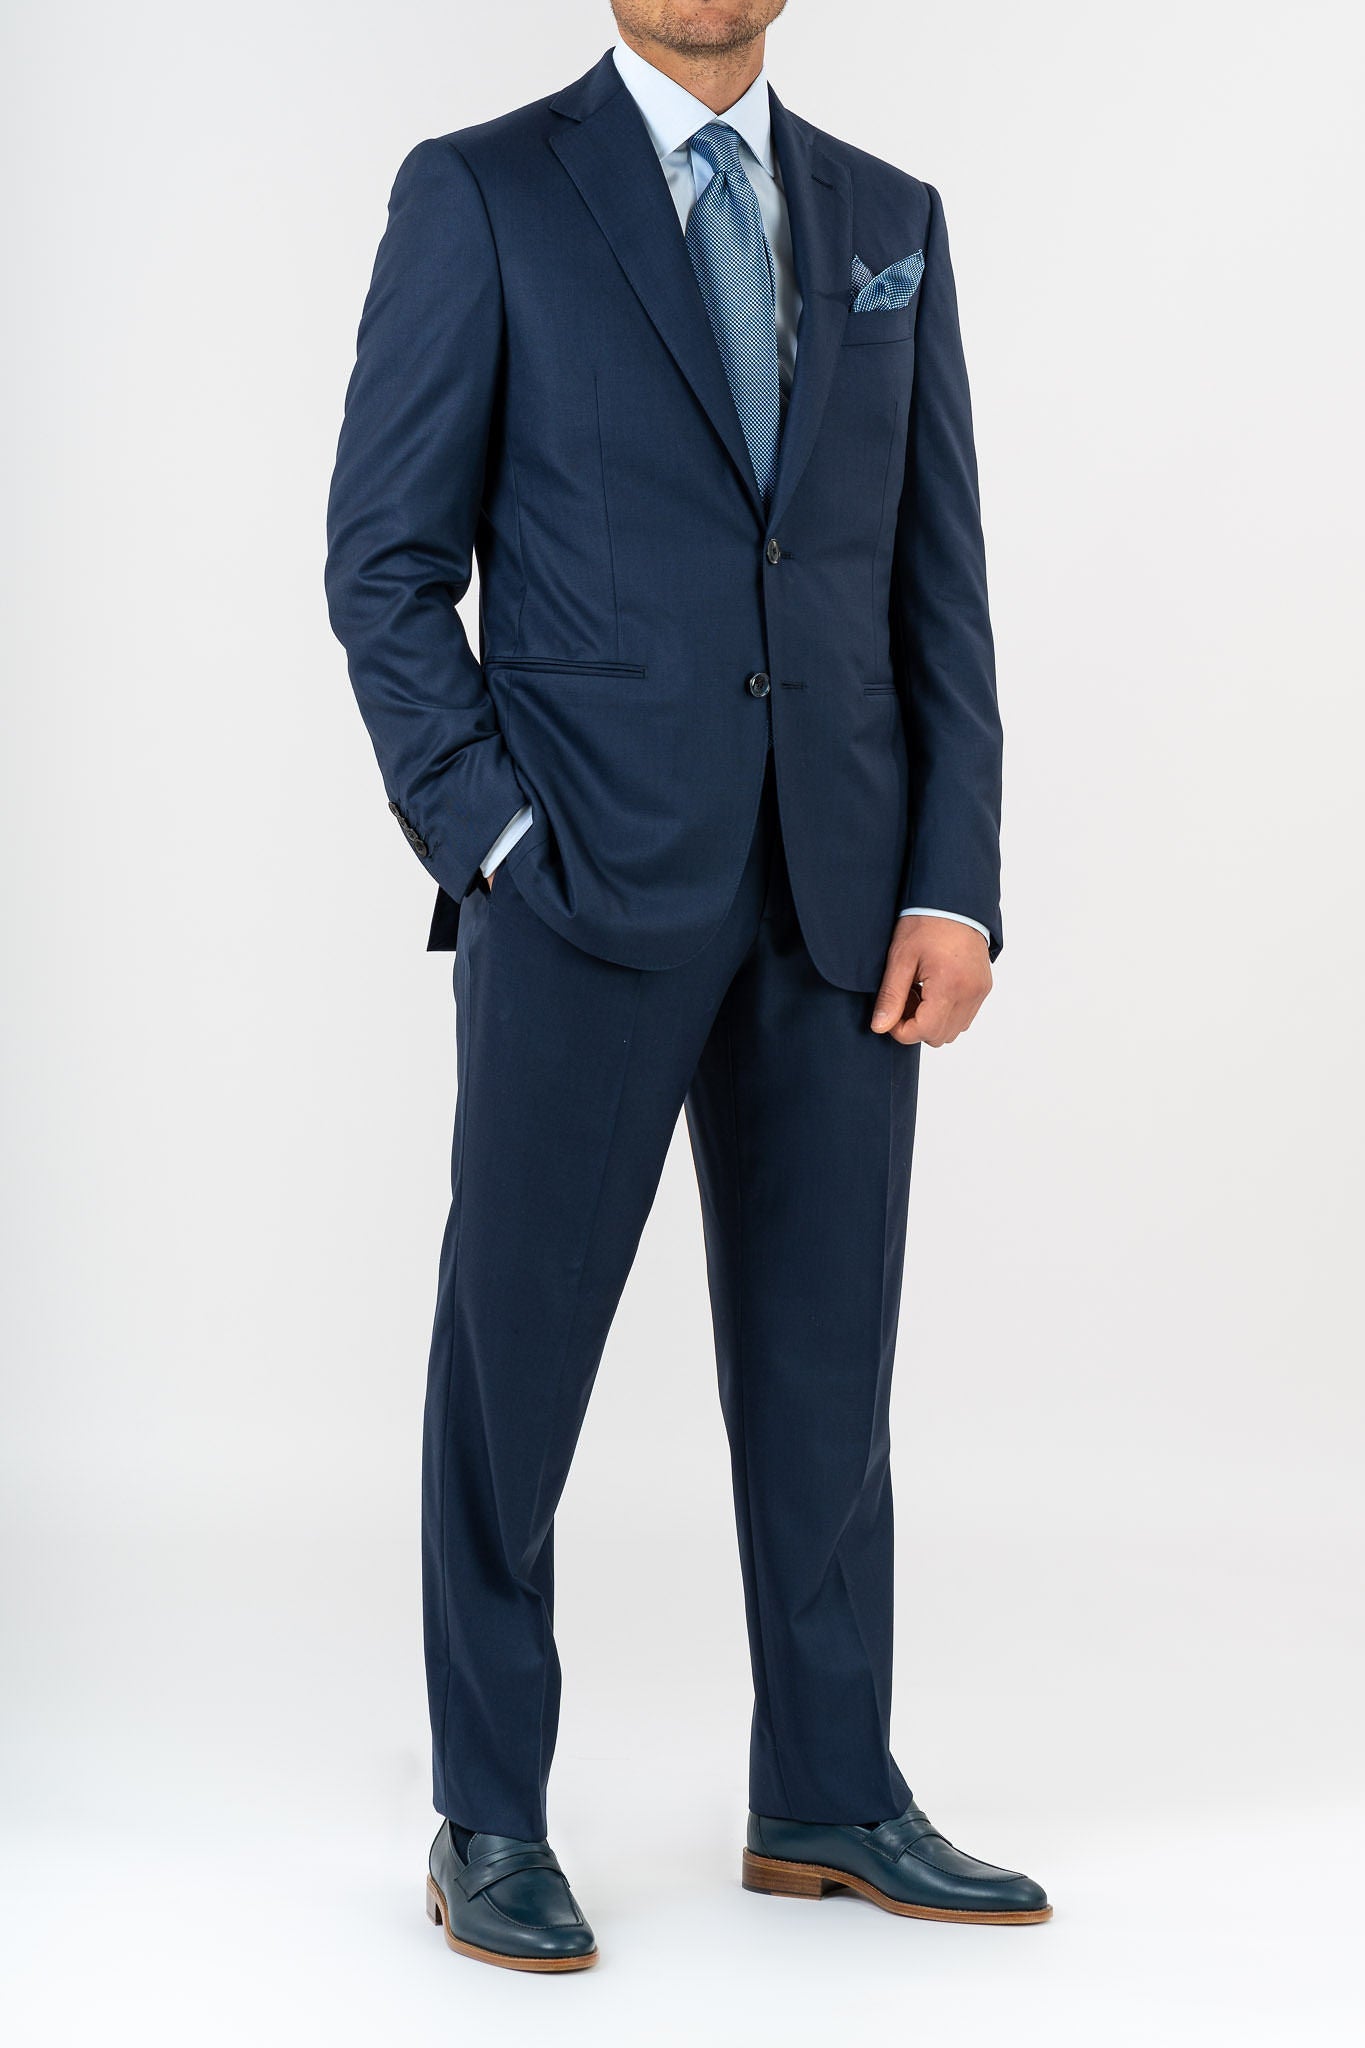 This Sartoria dei Duchi suit is realized in two pieces with the finest fabric of Loro Piana 100% wool &quot;Super 200s&quot;. This elegant and refined suit is composed of a jacket with 2 buttons with welt pockets without flaps. The pants has only one pence and four pockets in total between front and back. Regular rise. There are no belt loops as they are designed to be worn with suspenders. Buttonholes and dots of the jacket are exclusively handmade. 